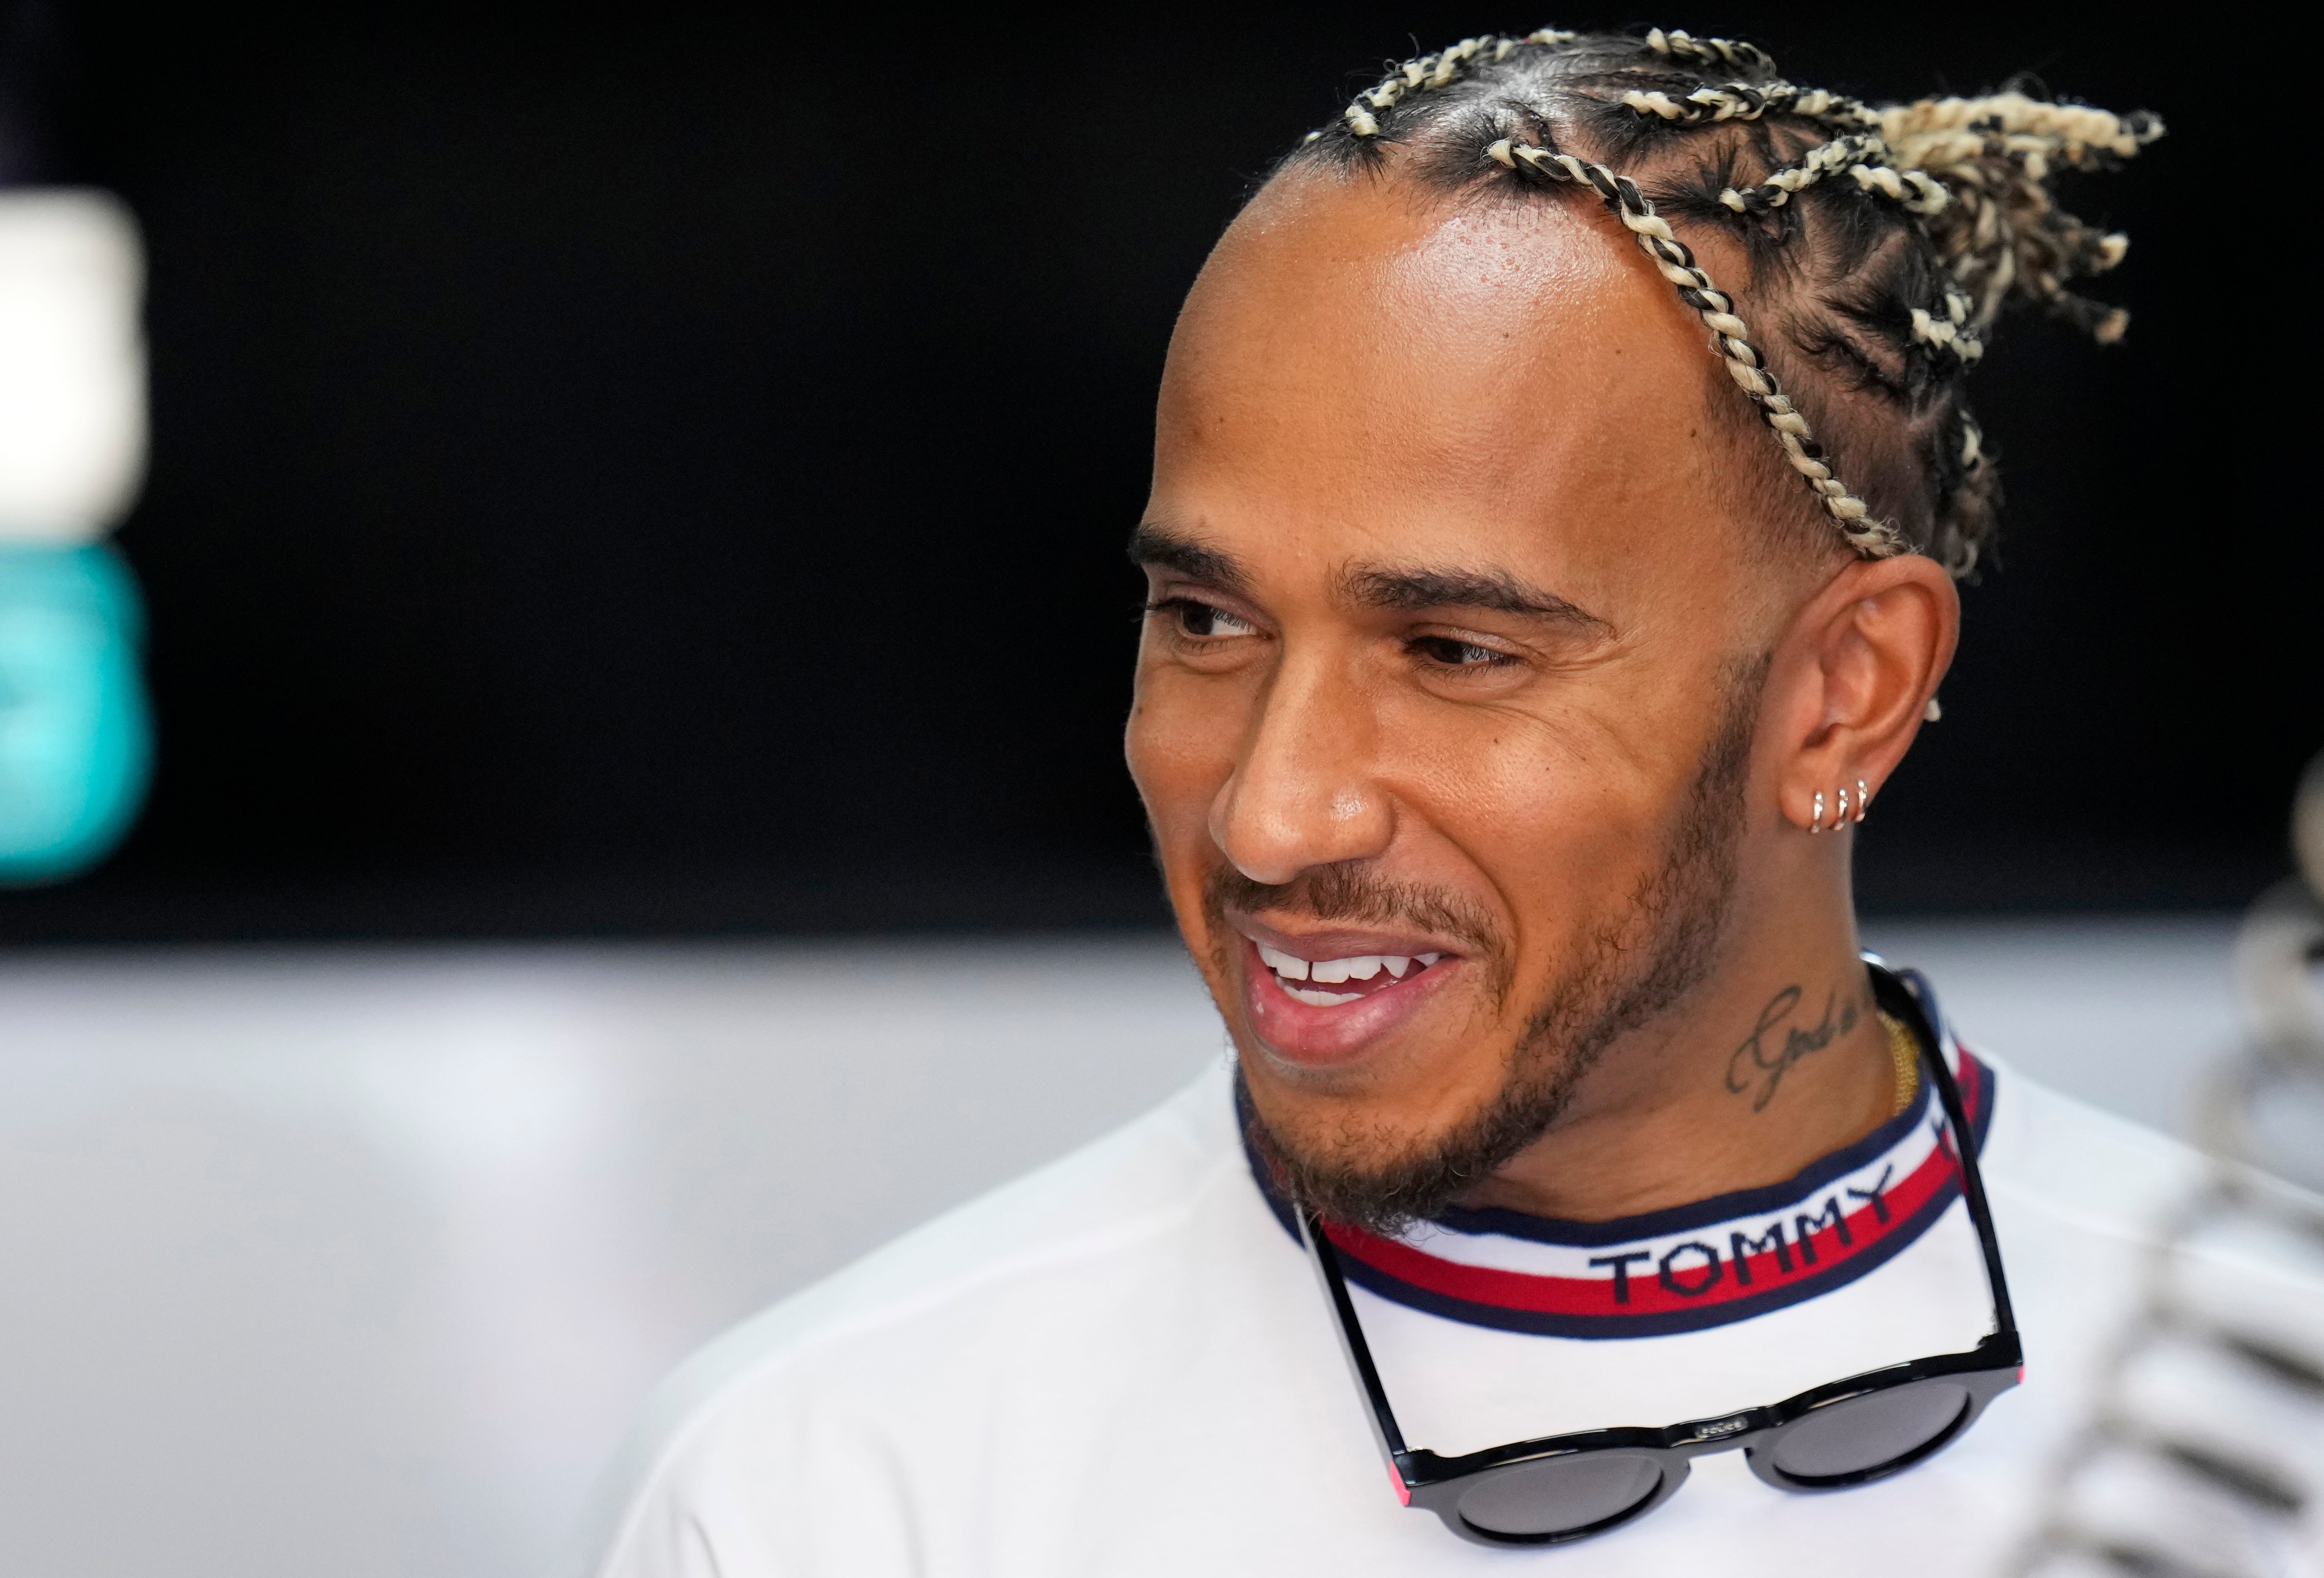 Lewis Hamilton watched the opening session from the back of the Mercedes garage (Manu Fernandez/AP)